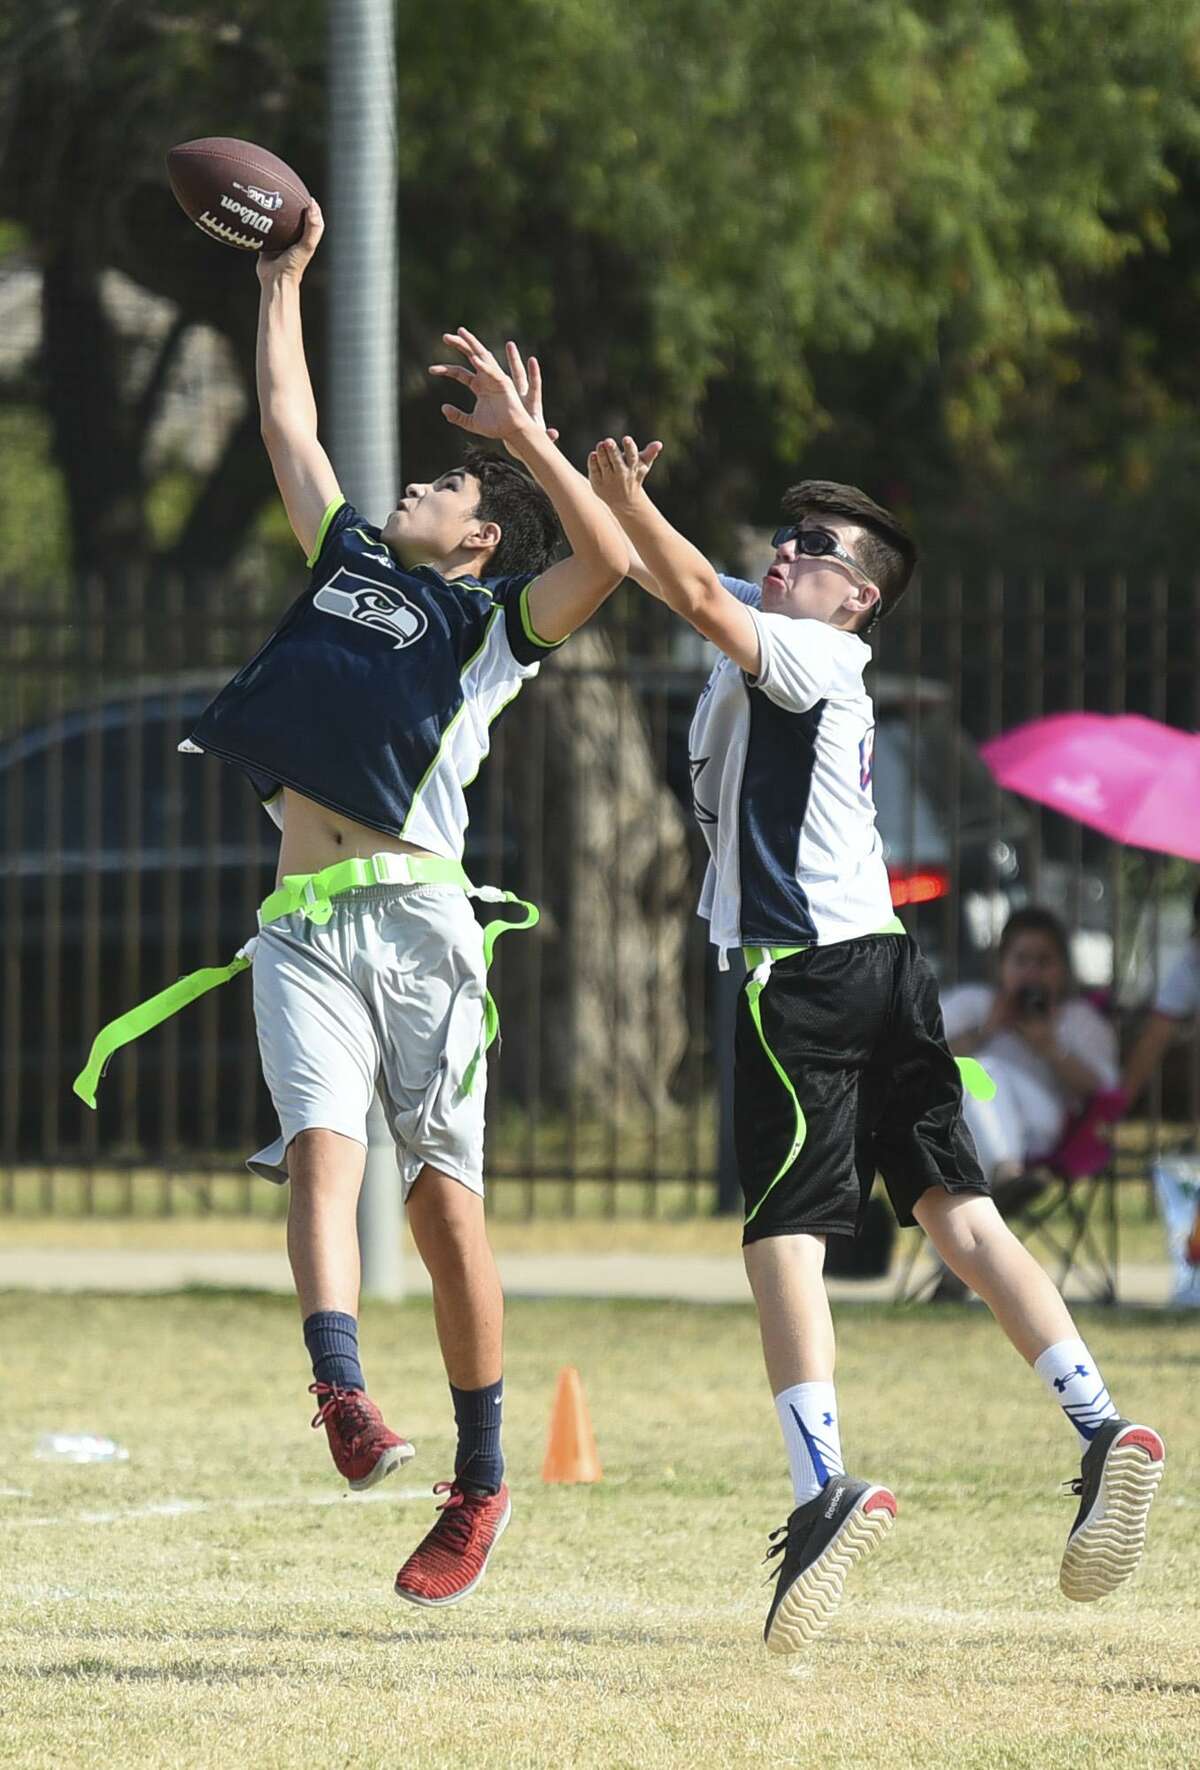 More than 300 children are participating in Laredo’s first year of the NFL Flag Football League this summer at Slaughter Park.